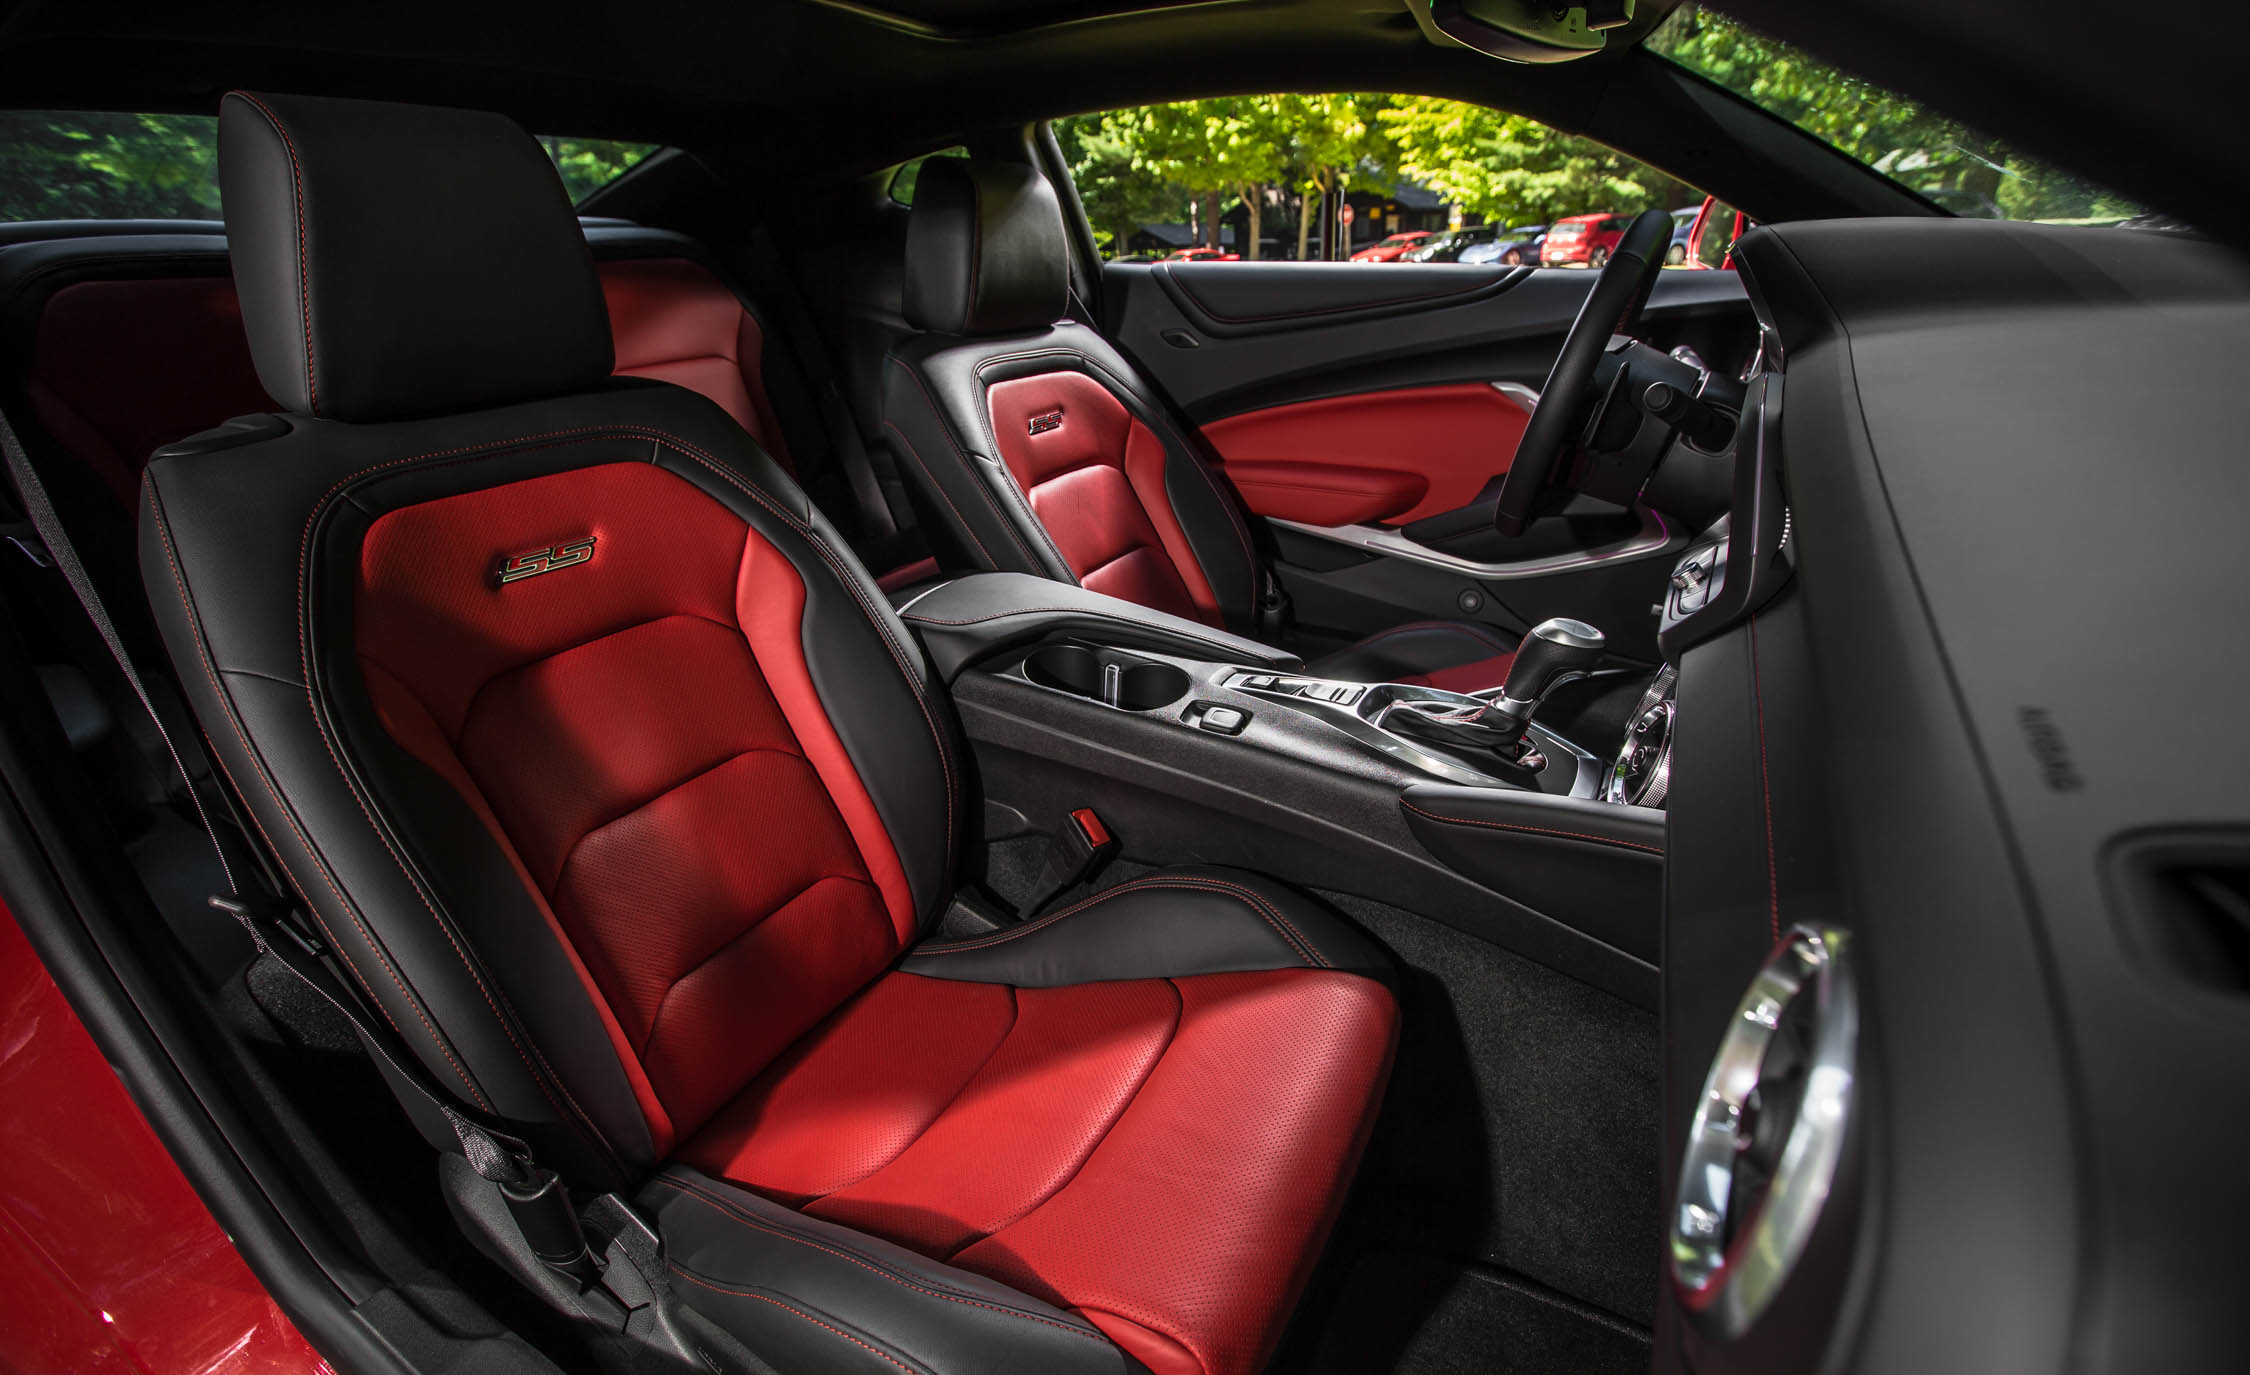 What Are the Benefits of Using Camaro Seat Covers?